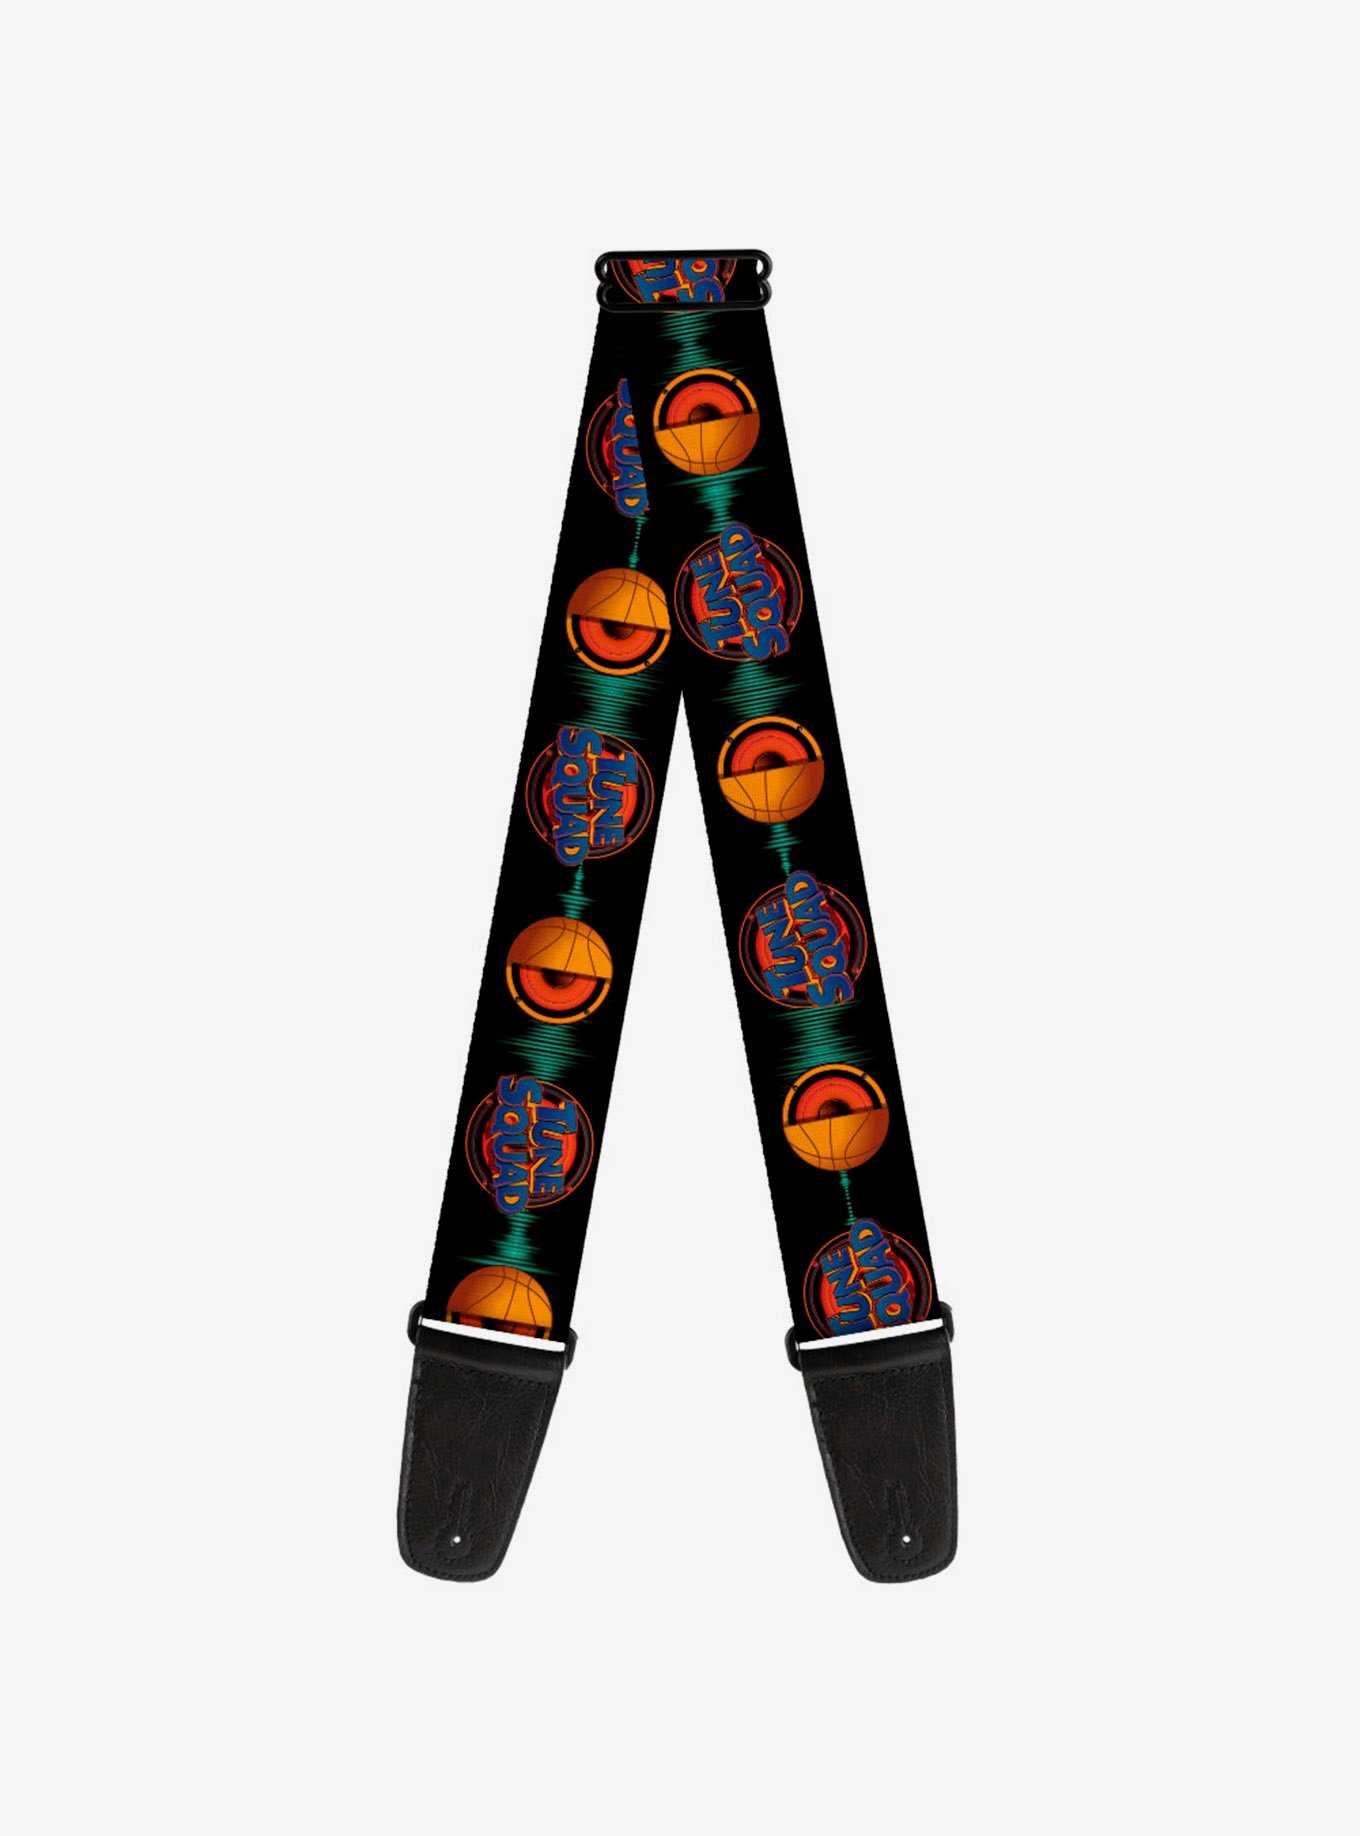 Space Jam: A New Legacy Tune Squad Logos Guitar Strap, , hi-res